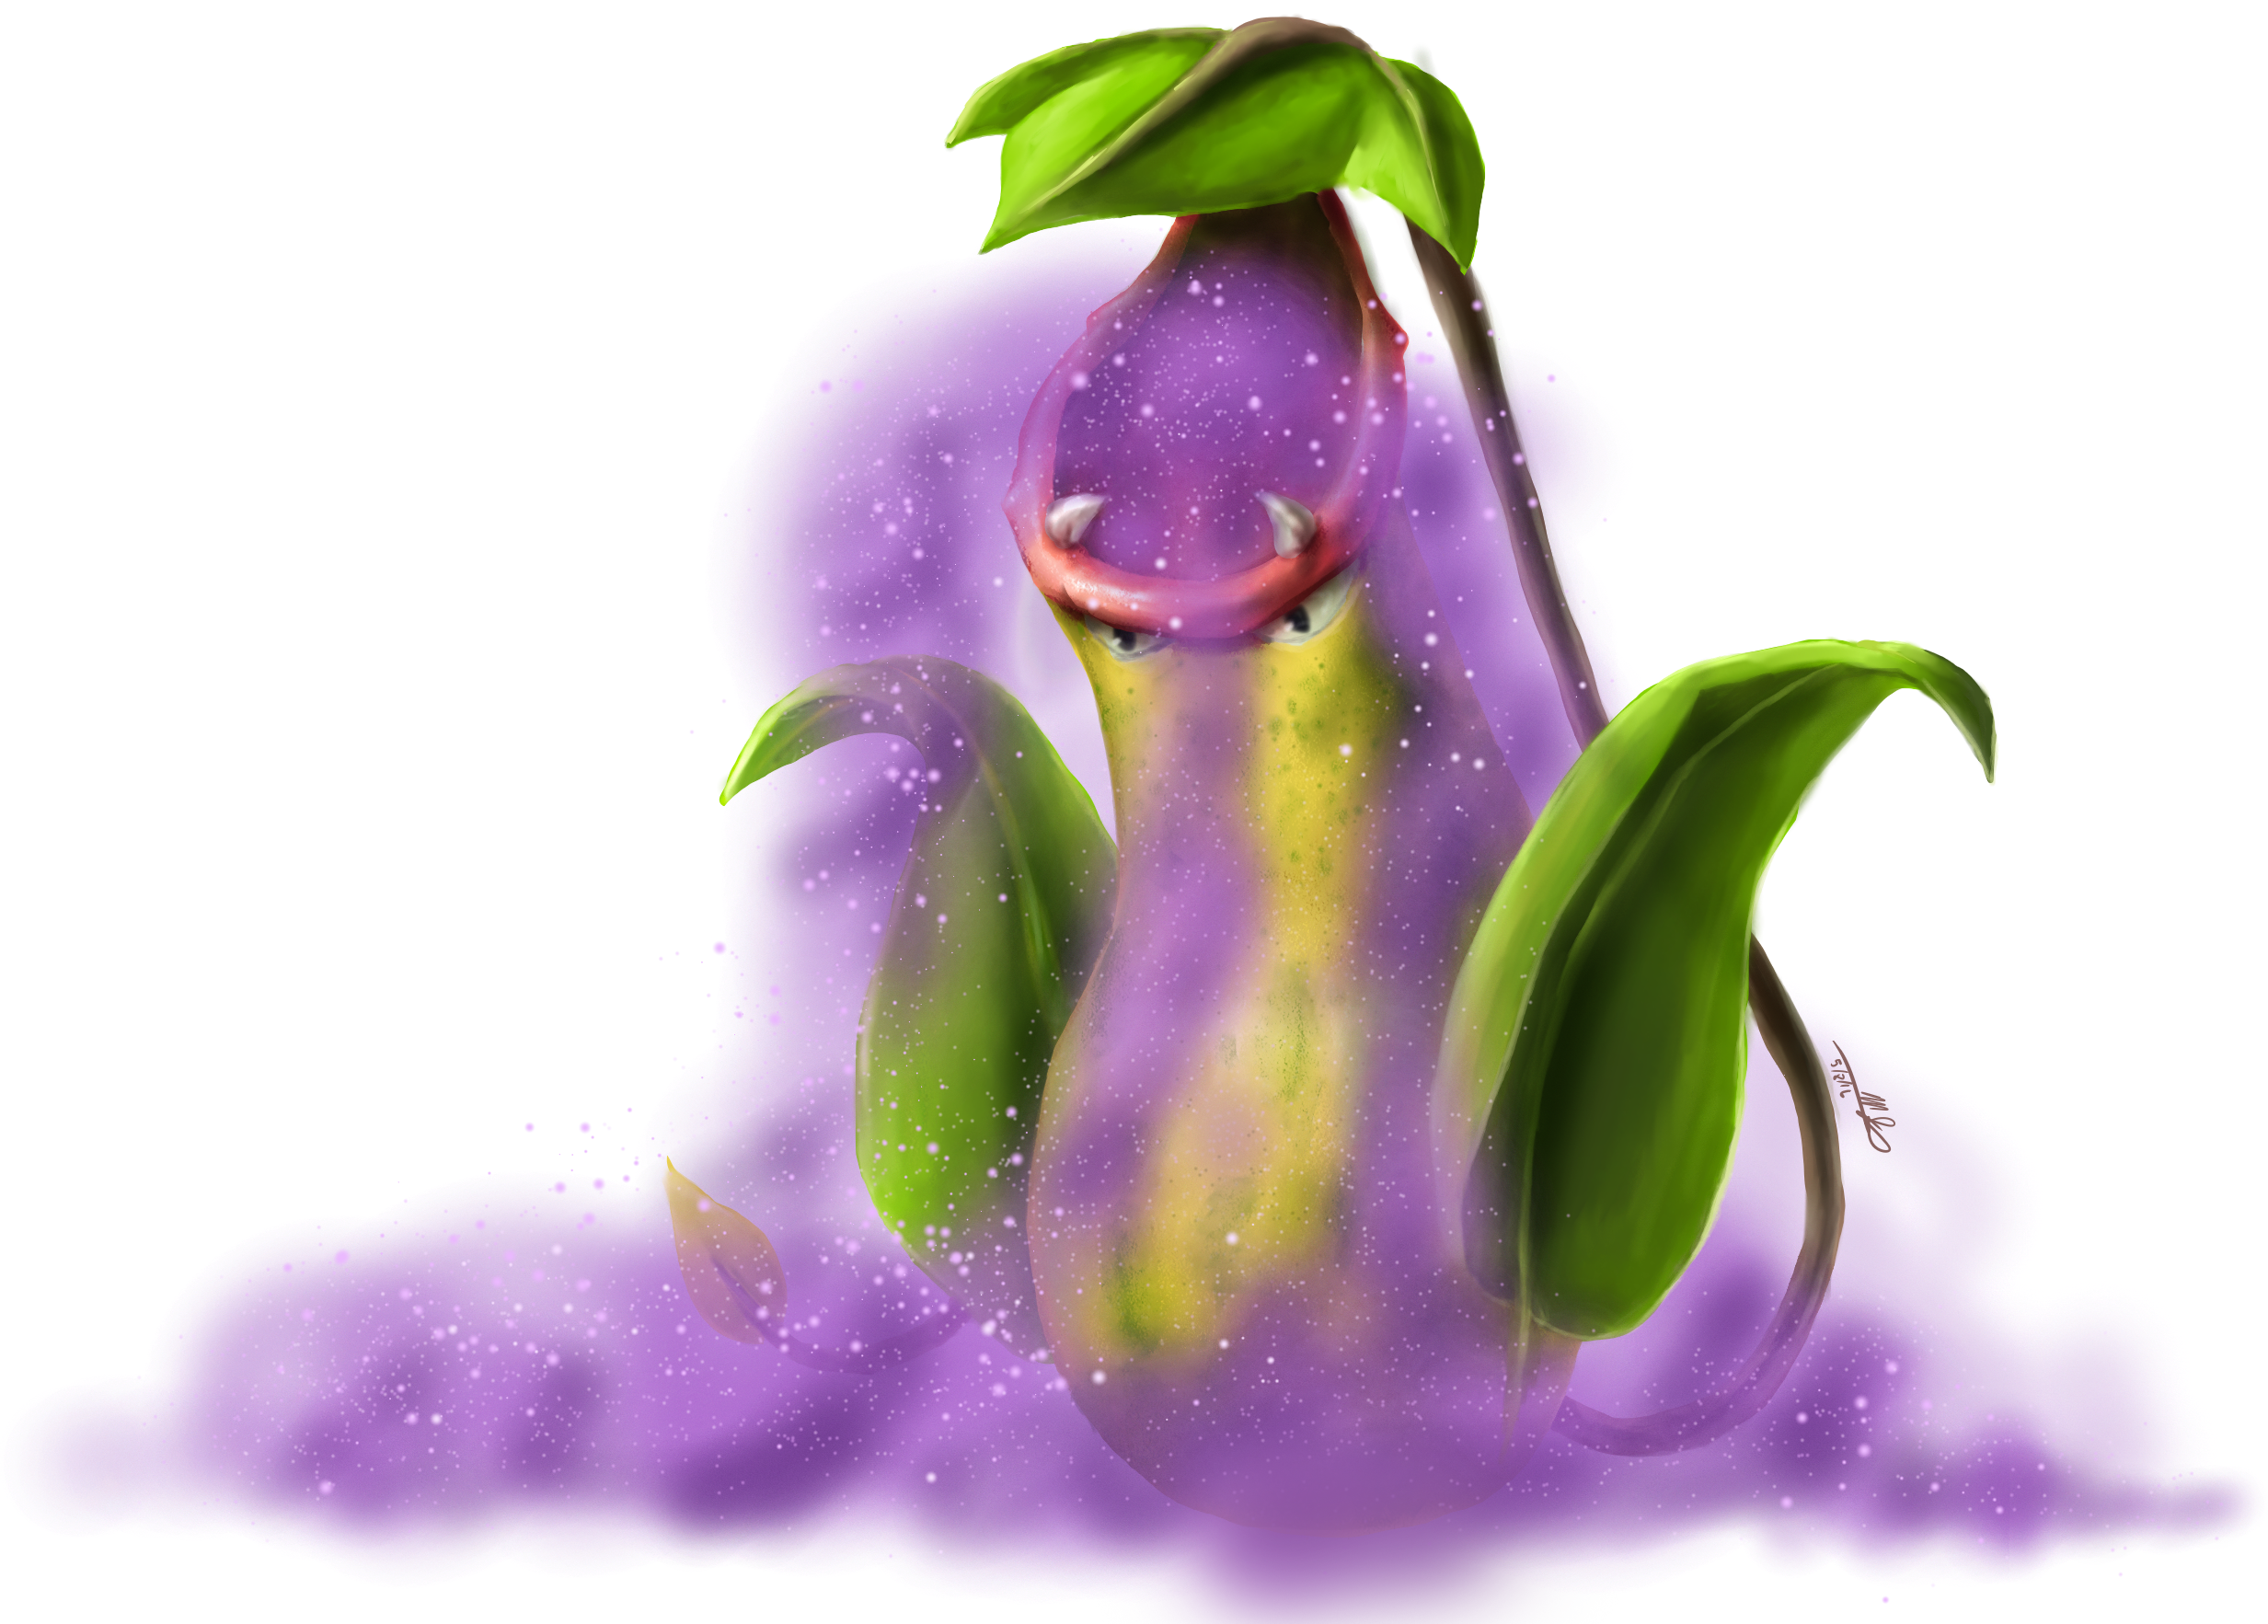 victreebel-used-poison-powder-by-yggdrassal